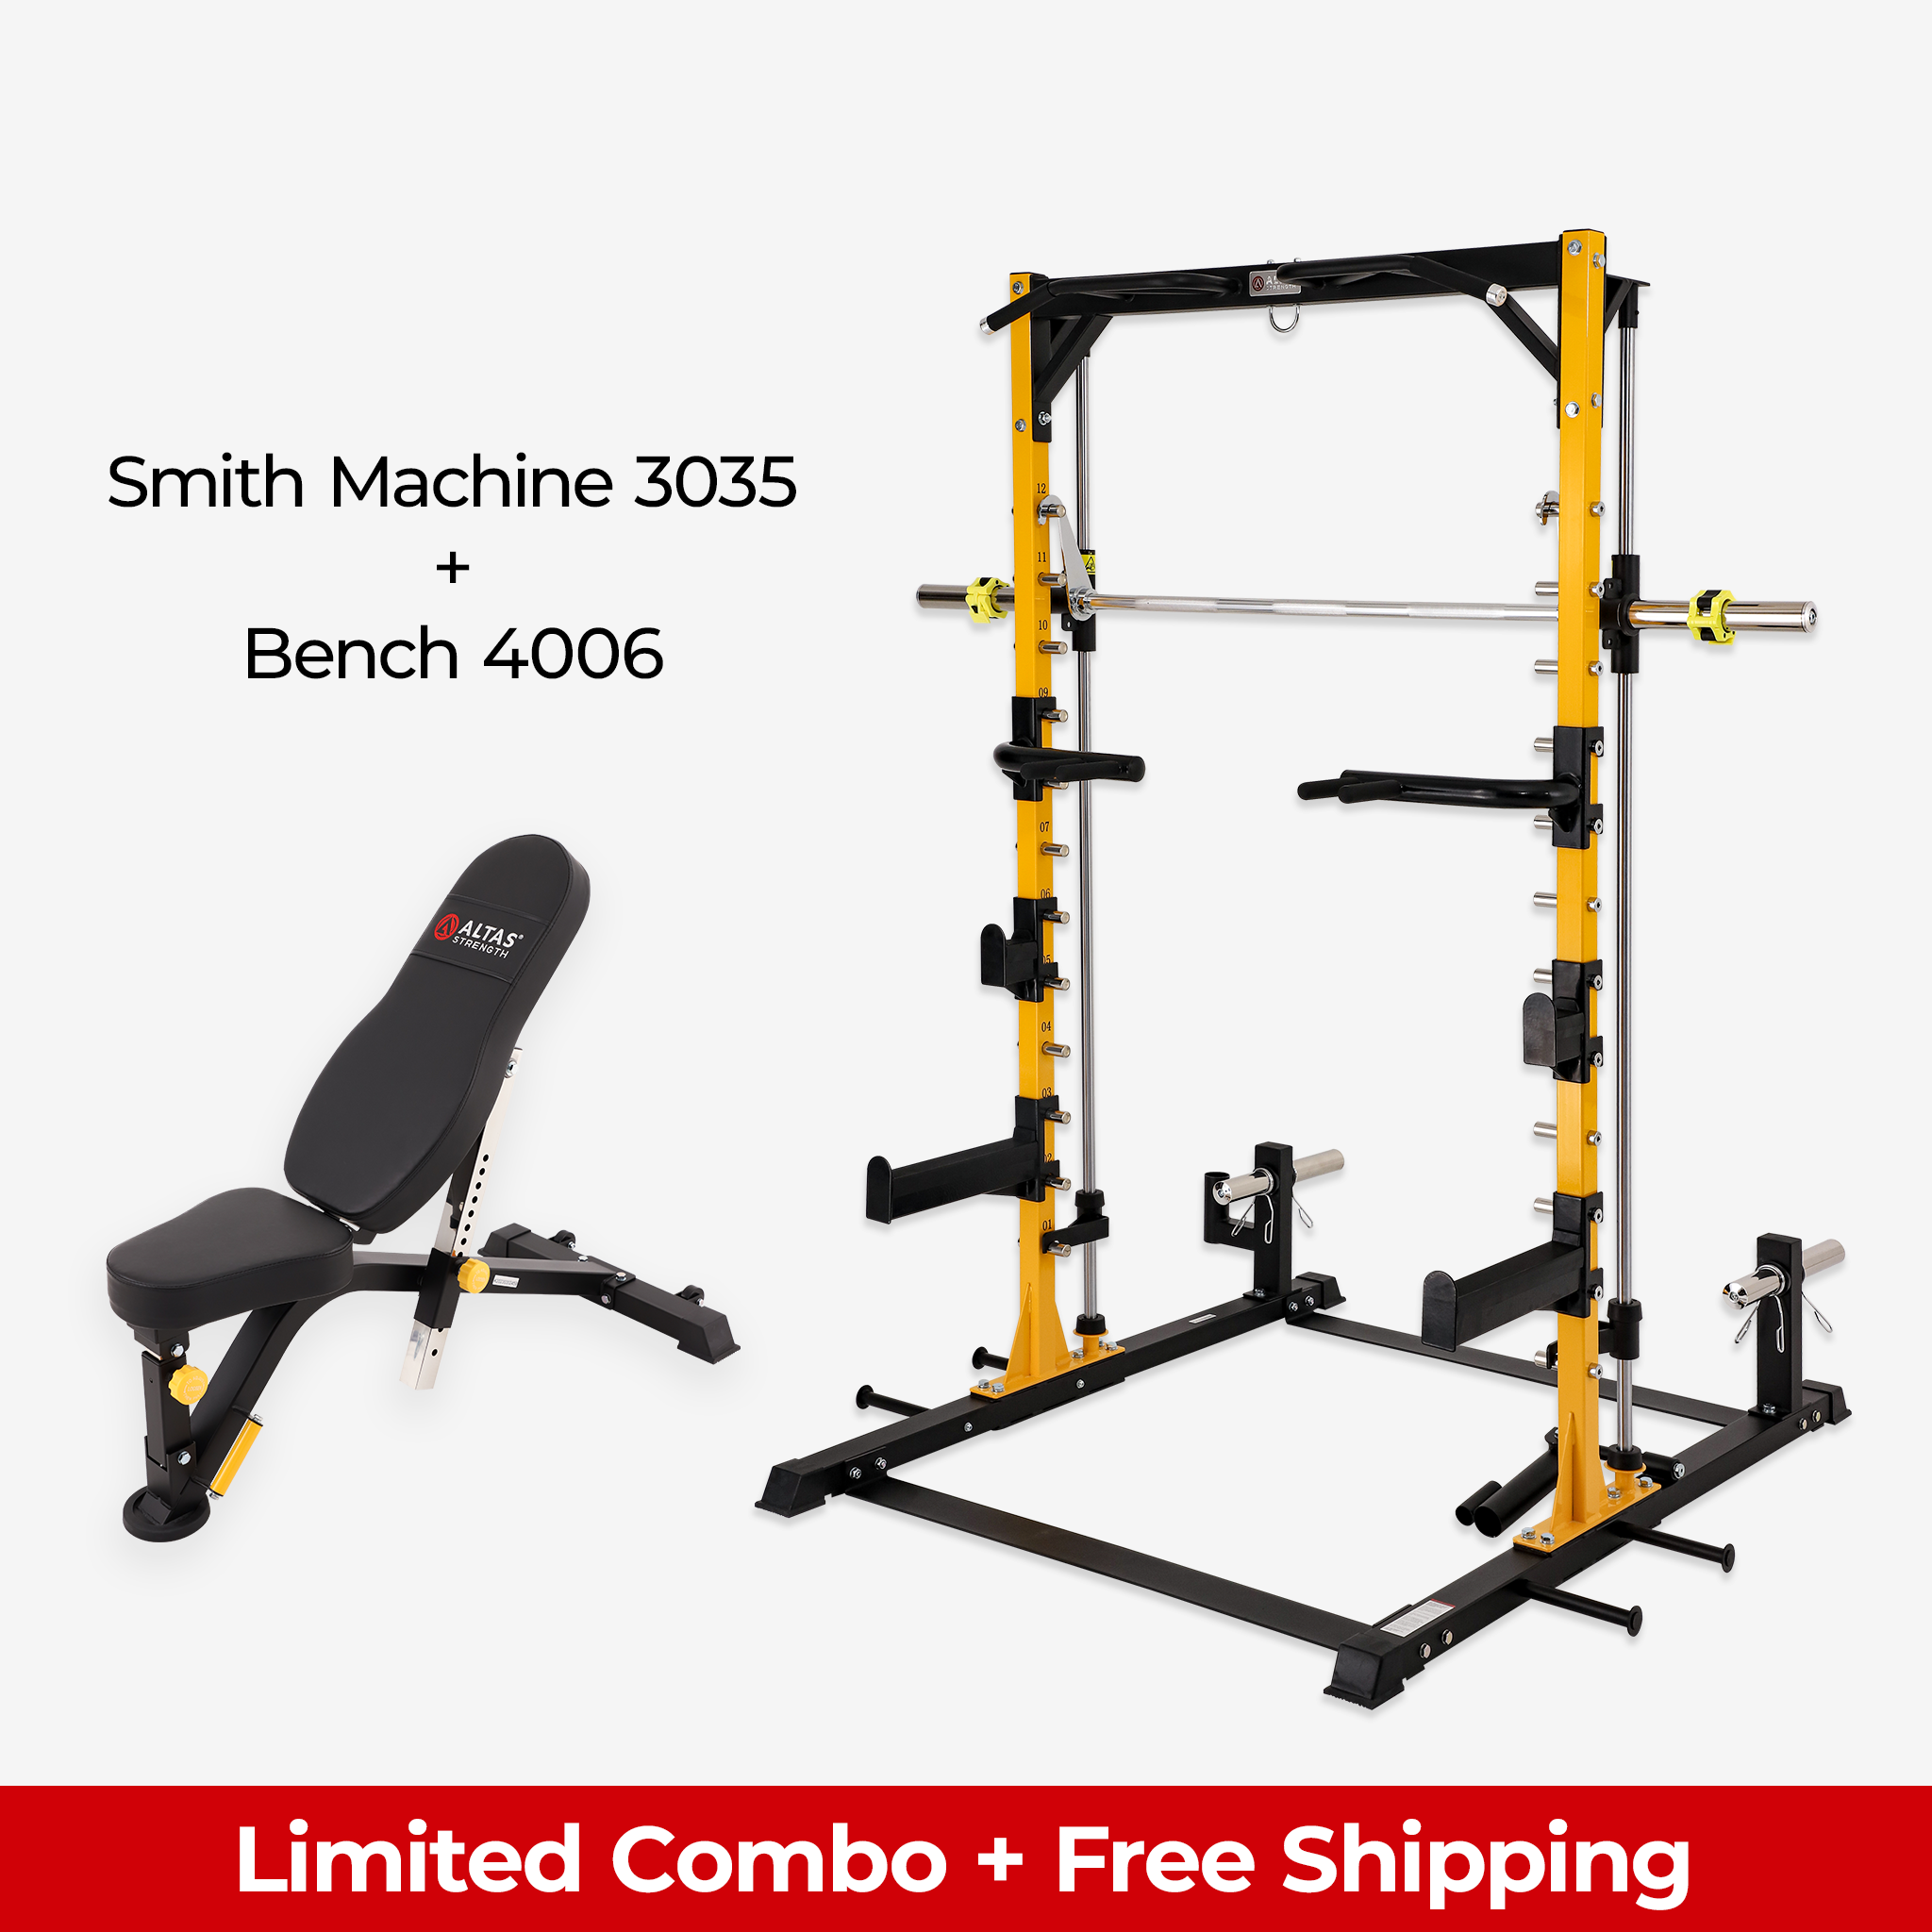 Limited Combo - Smith Machine AL-3035 + Bench 4006